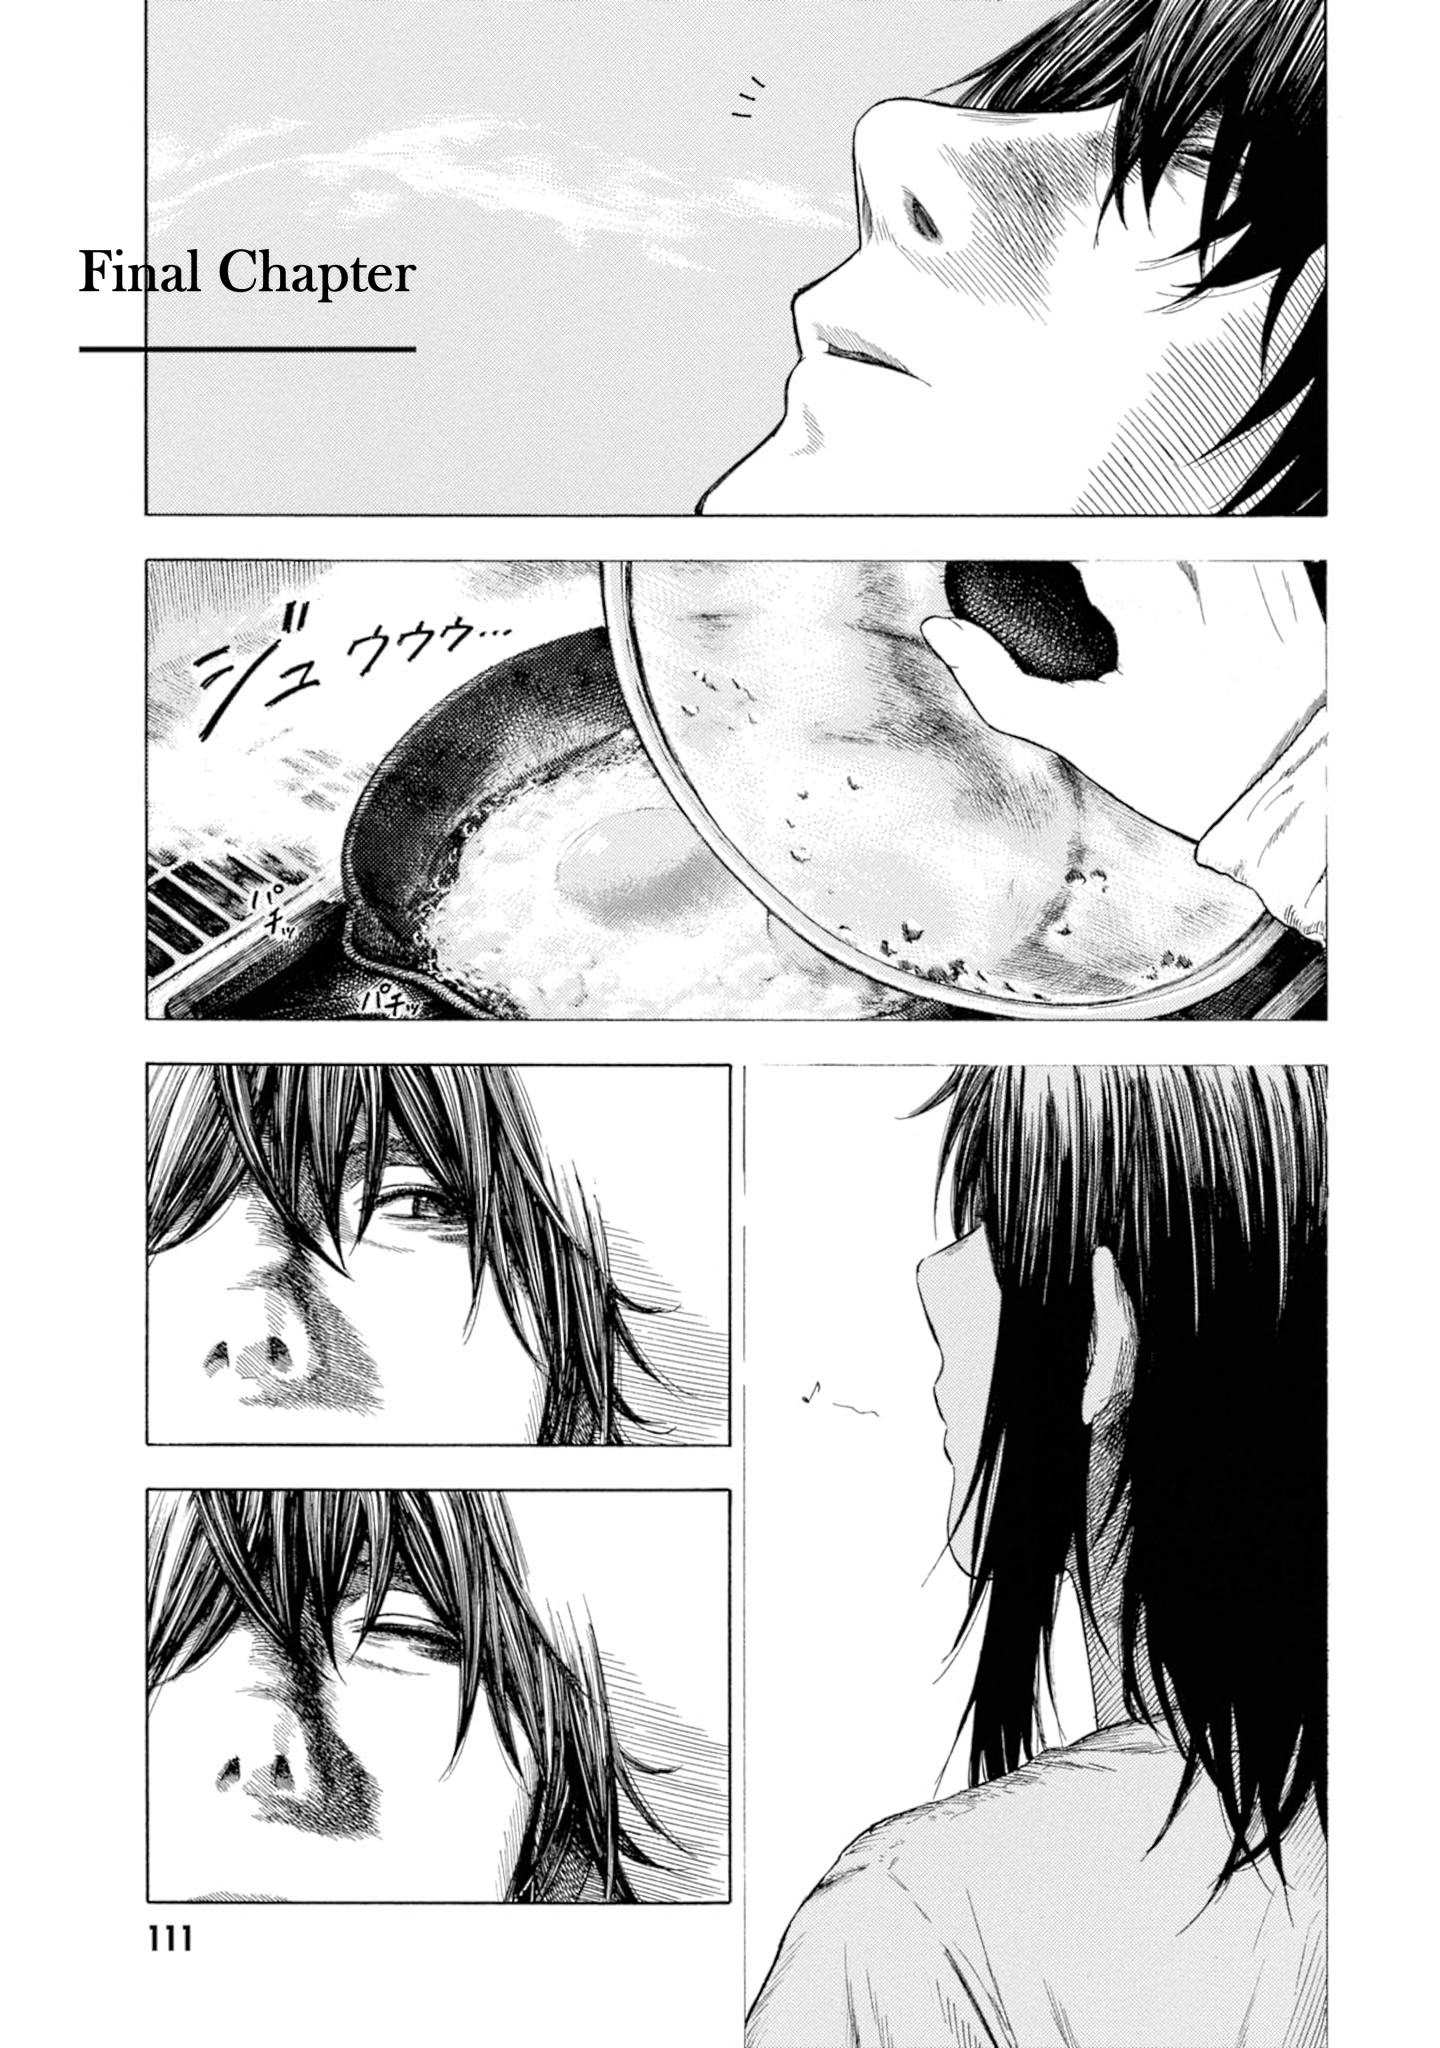 Parasite In Love Vol.3 Chapter 14: Final Chapter - Picture 1